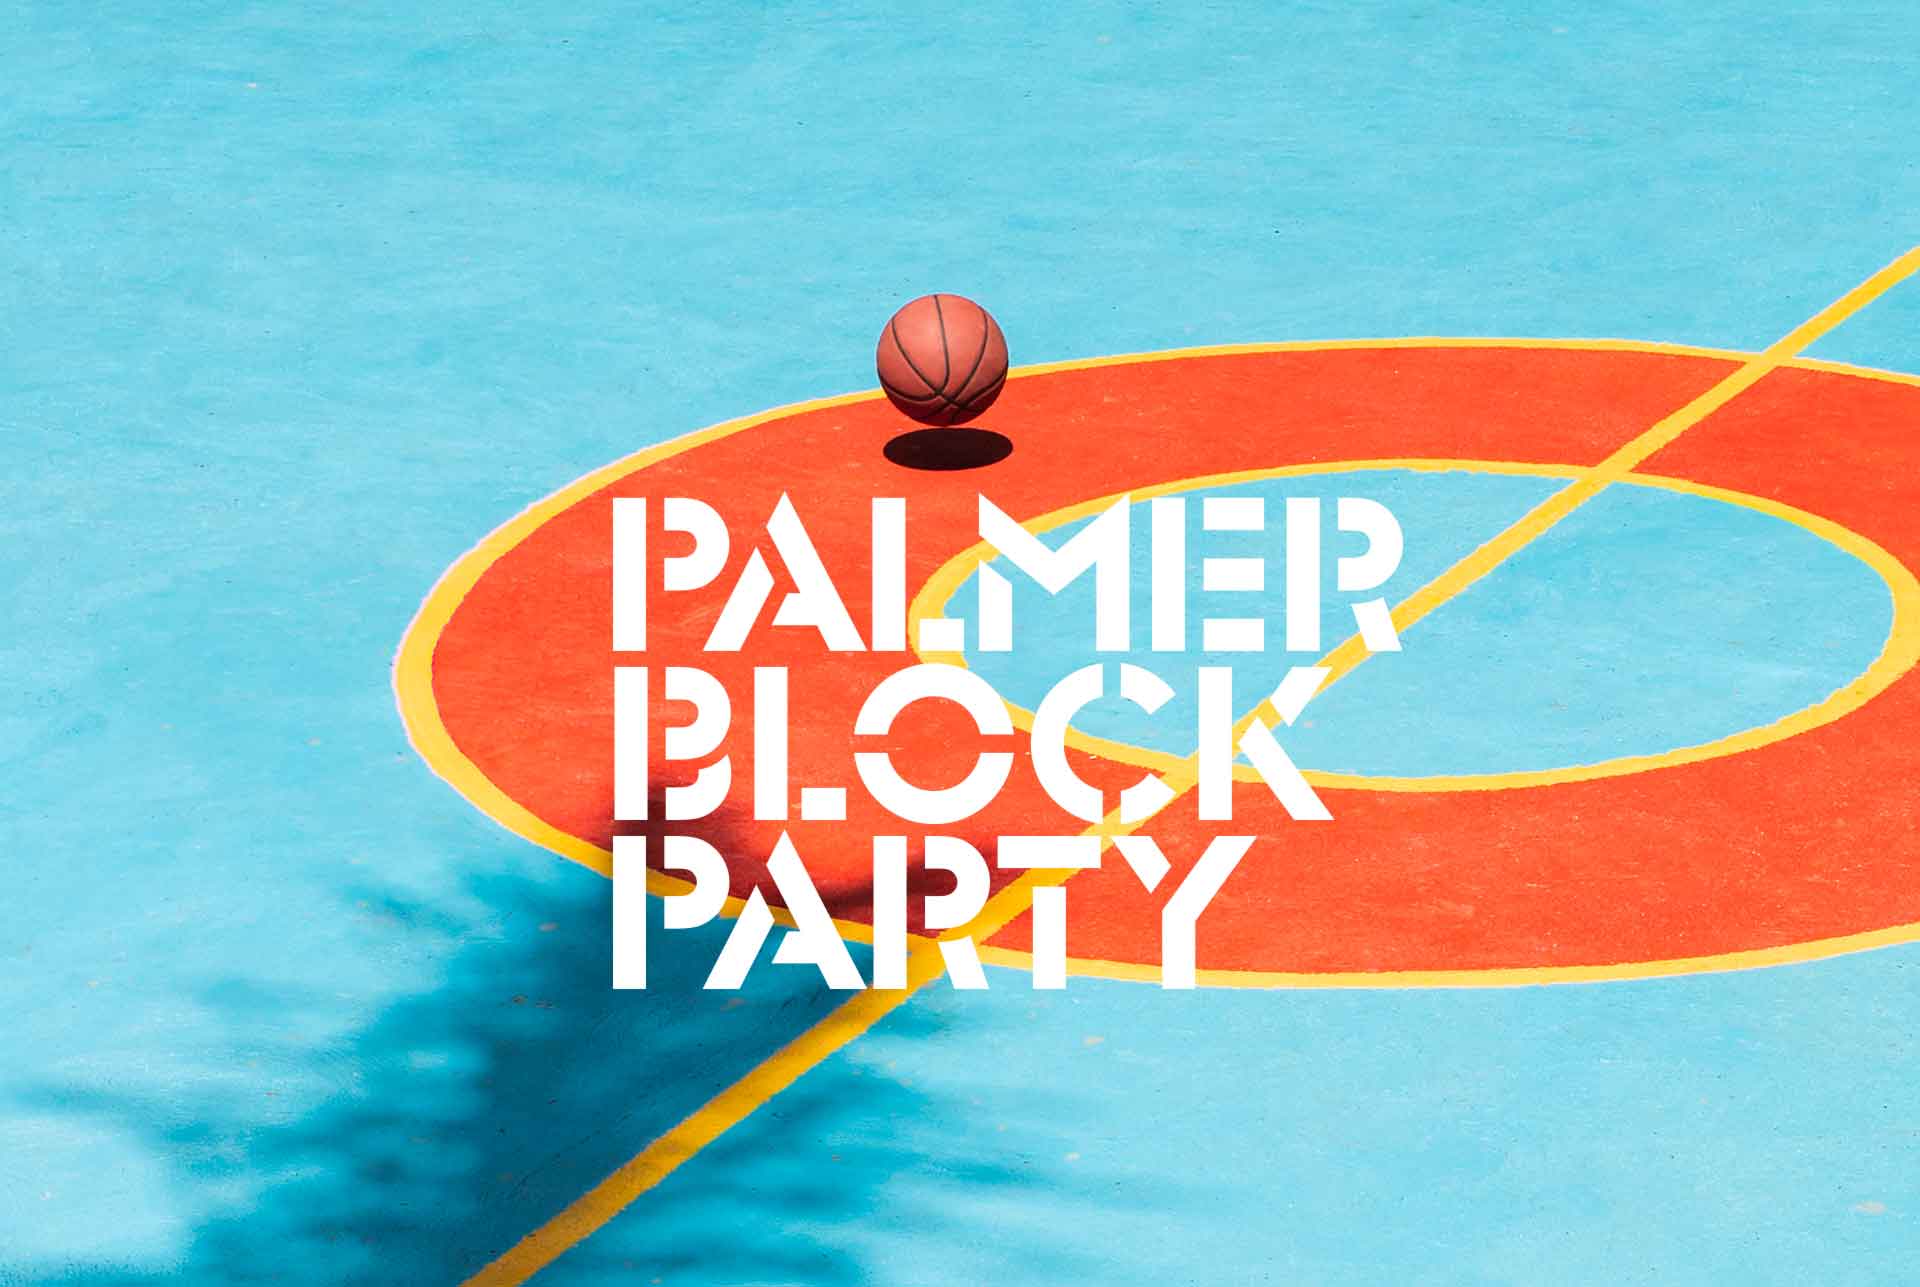 Palmer Block Party 2021